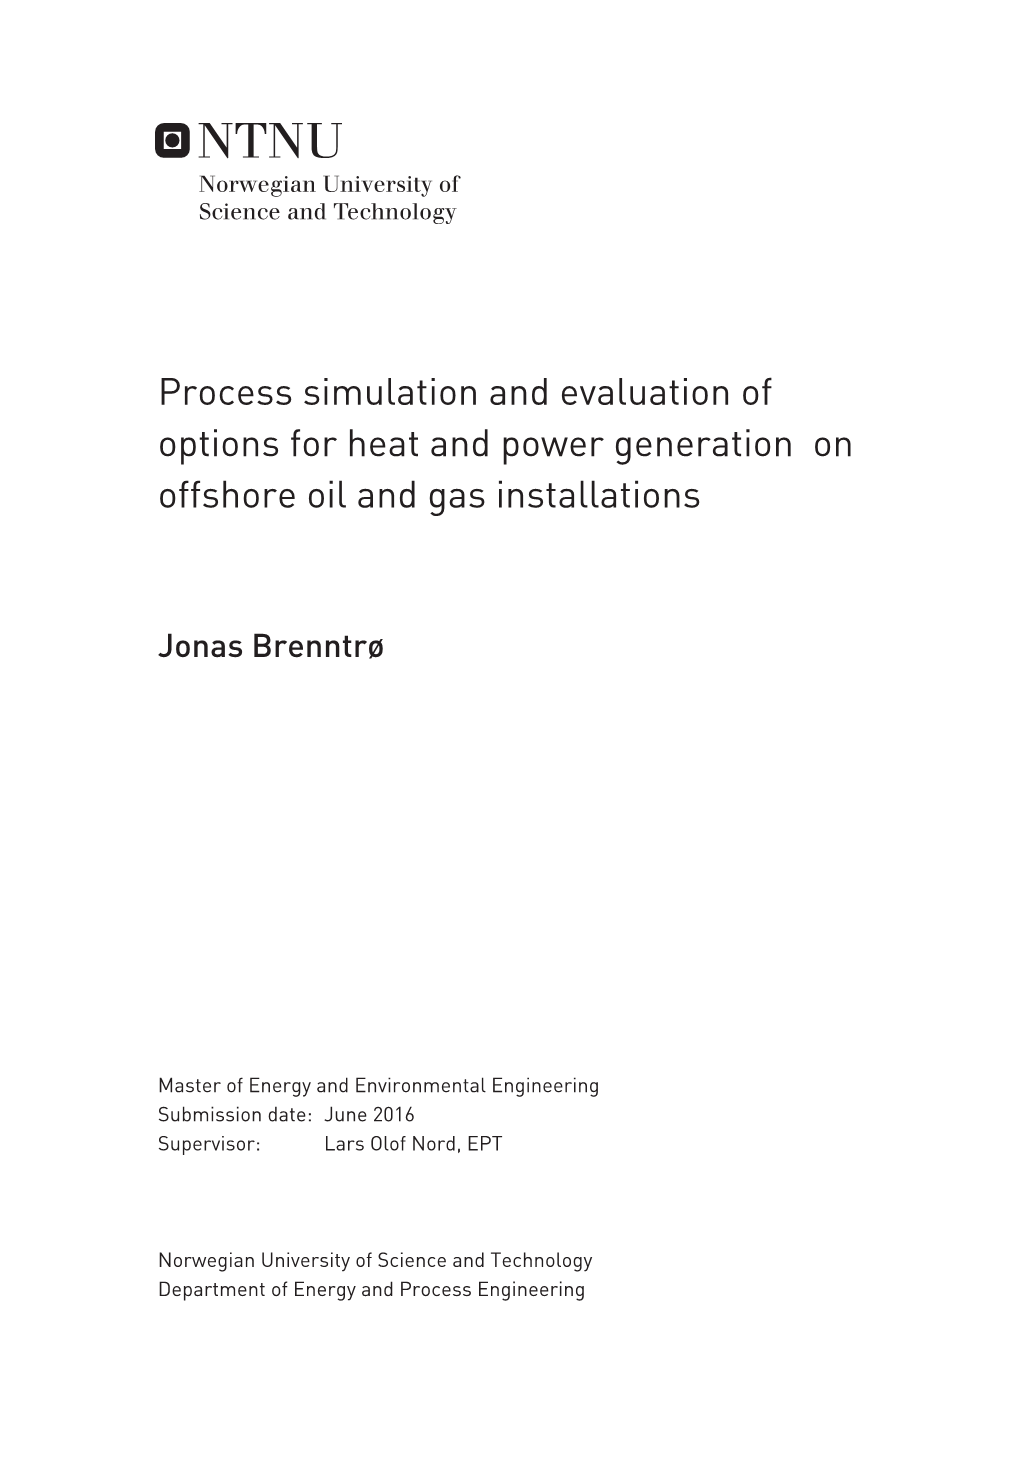 Process Simulation and Evaluation of Options for Heat and Power Generation on Offshore Oil and Gas Installations